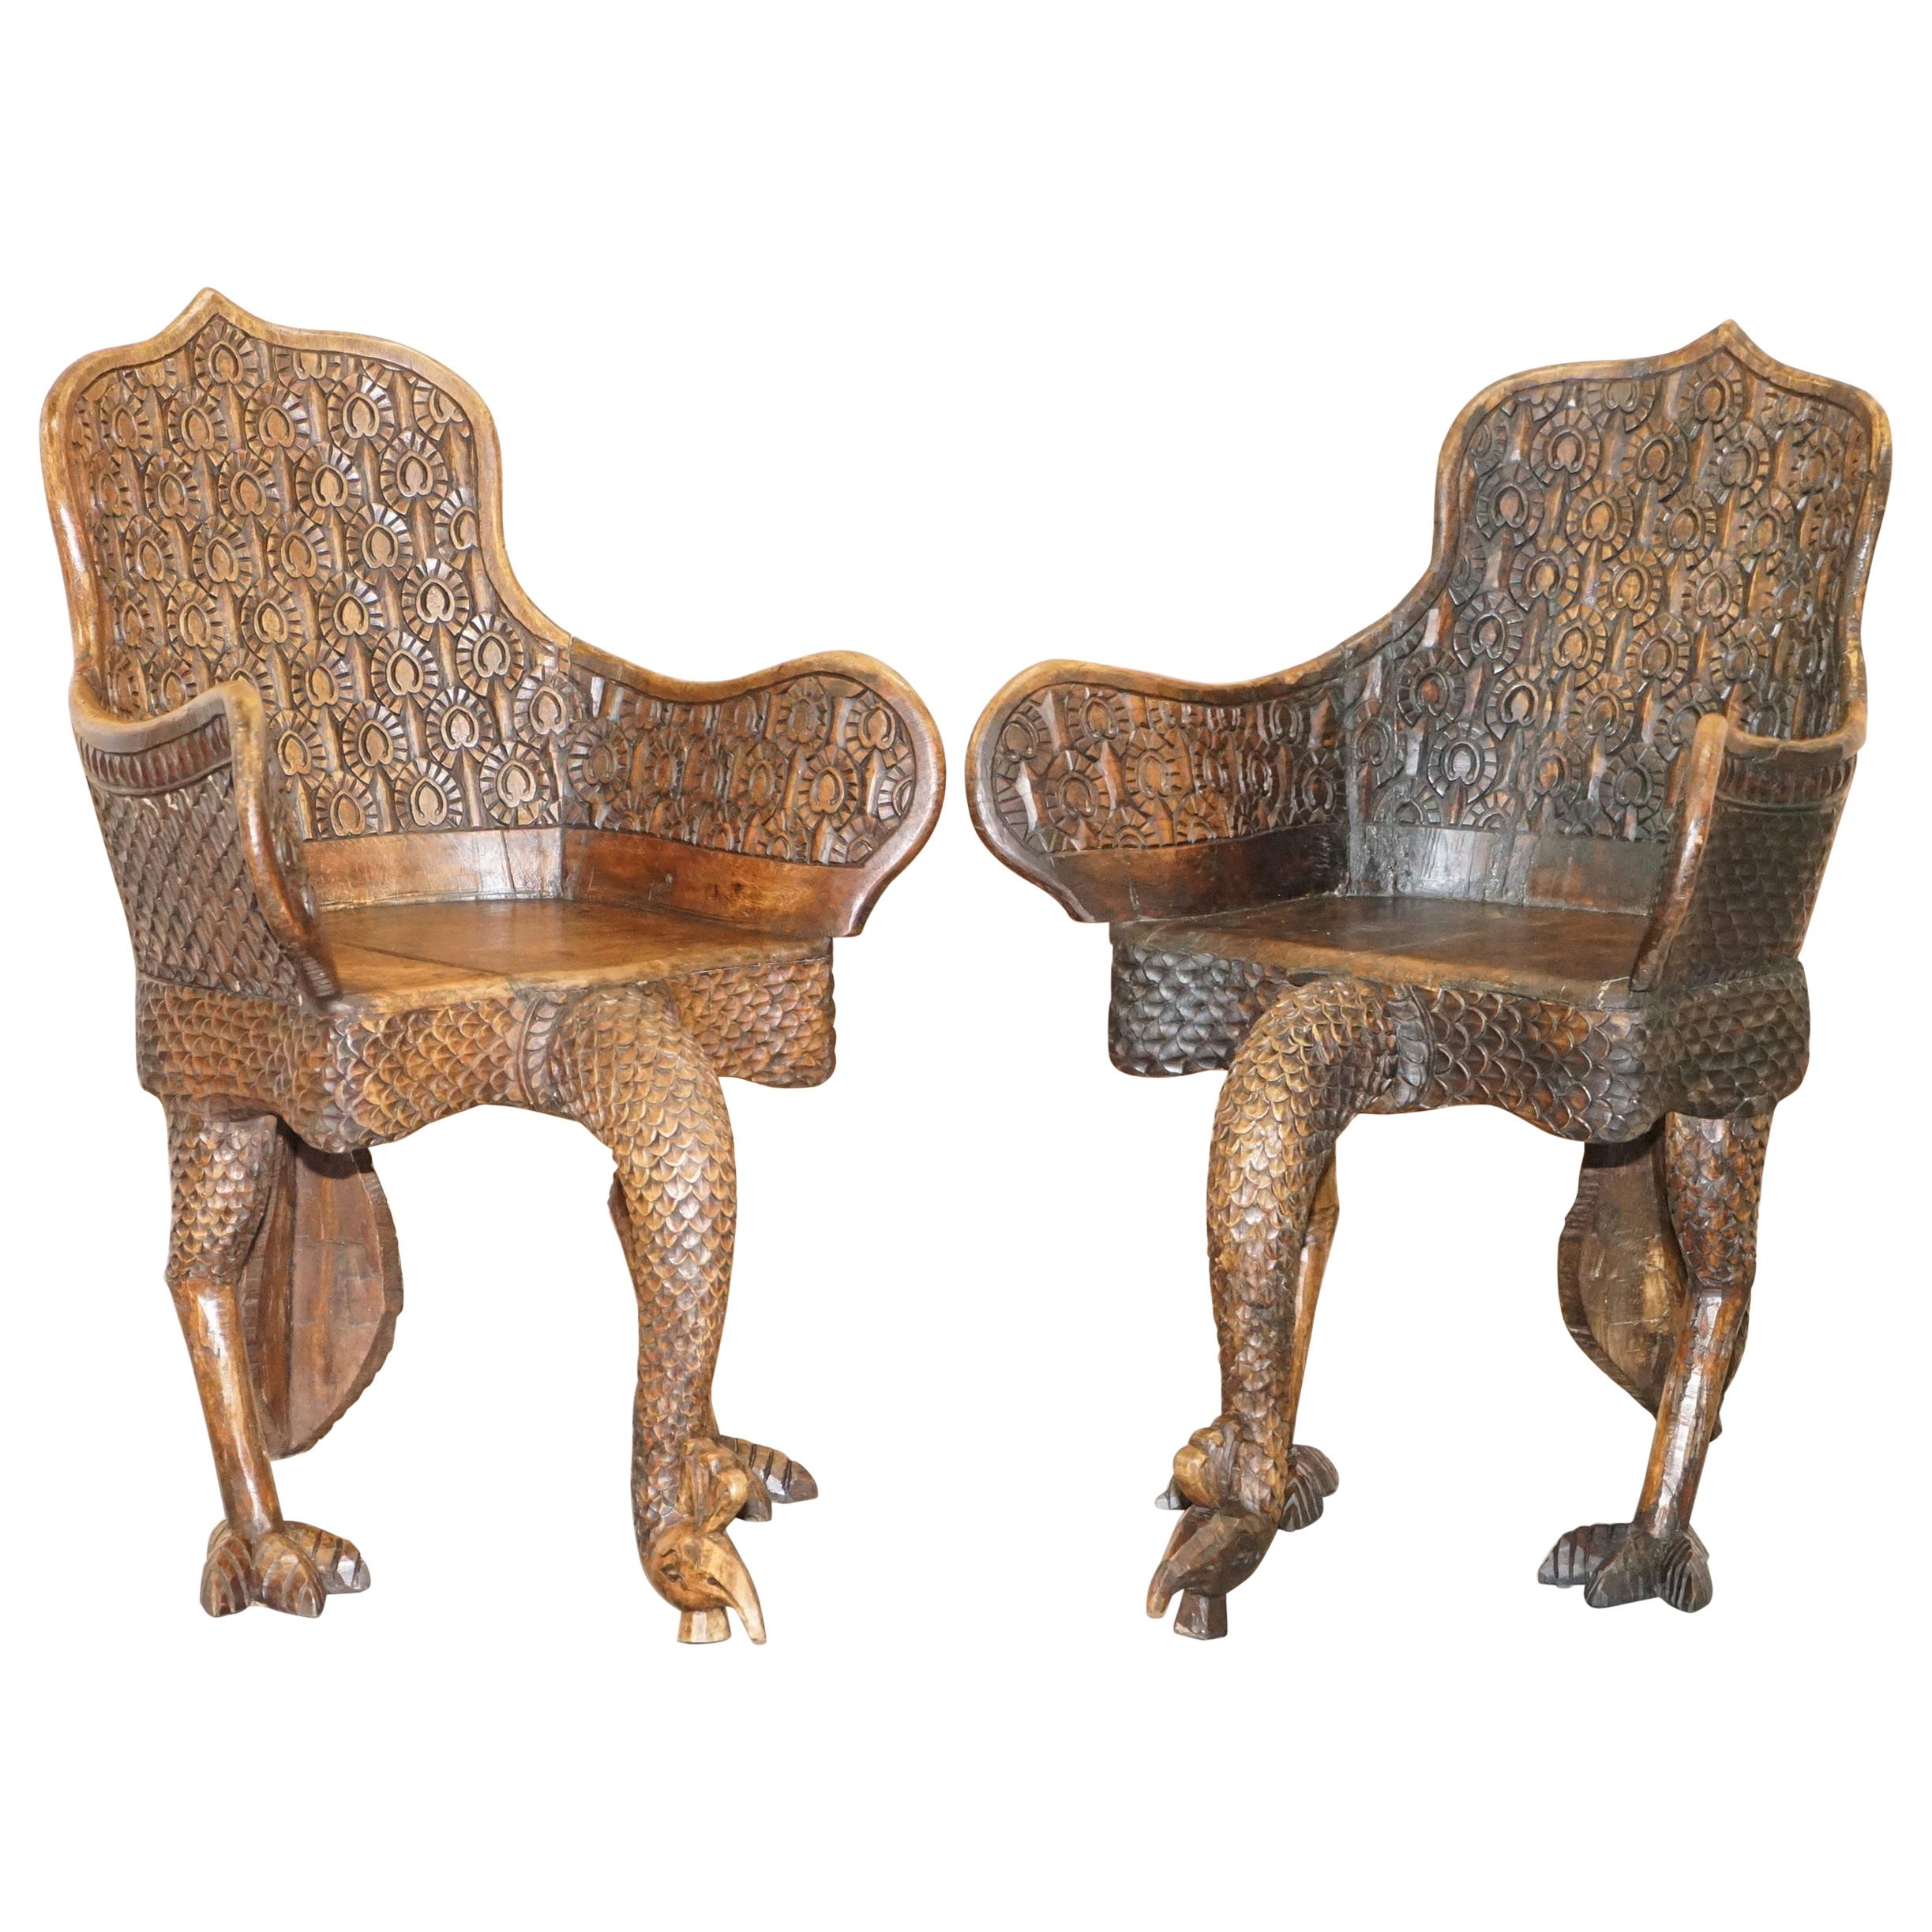 Pair of Ornate Burmese Anglo Indian Hand Carved circa 1880 Peacock Armchairs For Sale